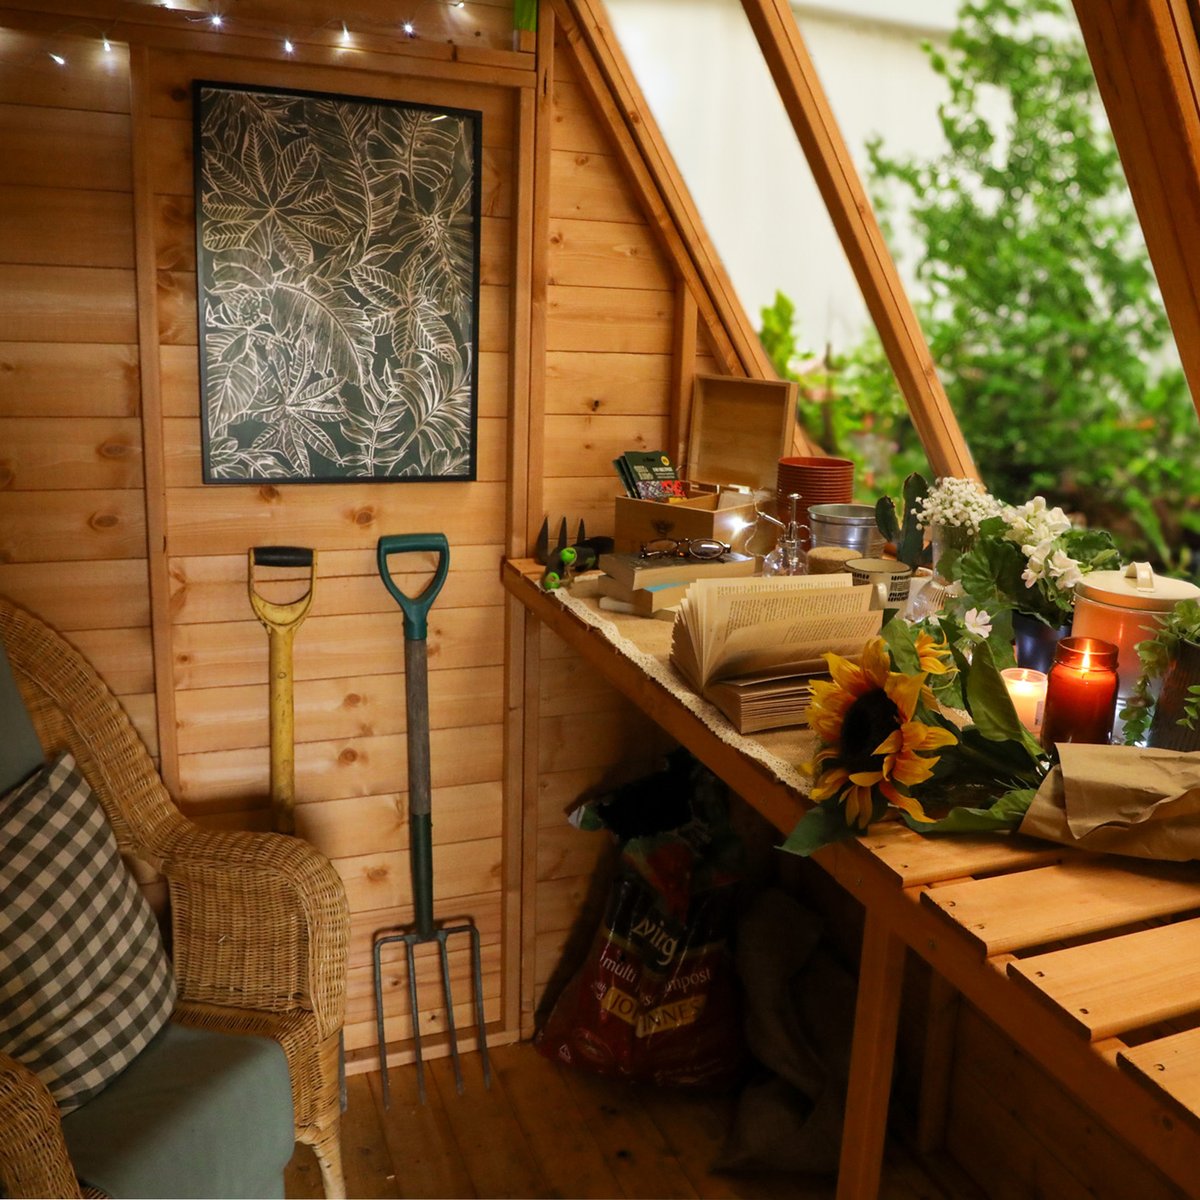 The possibilities are endless ✨🌿
Just take a look at how we’ve transformed our 8x6 Potting Shed into the ultimate relaxation zone. Complete with scented candles, fairy lights, books and of course - a nice cup of tea! The question is, what would you use our Potting Shed for?